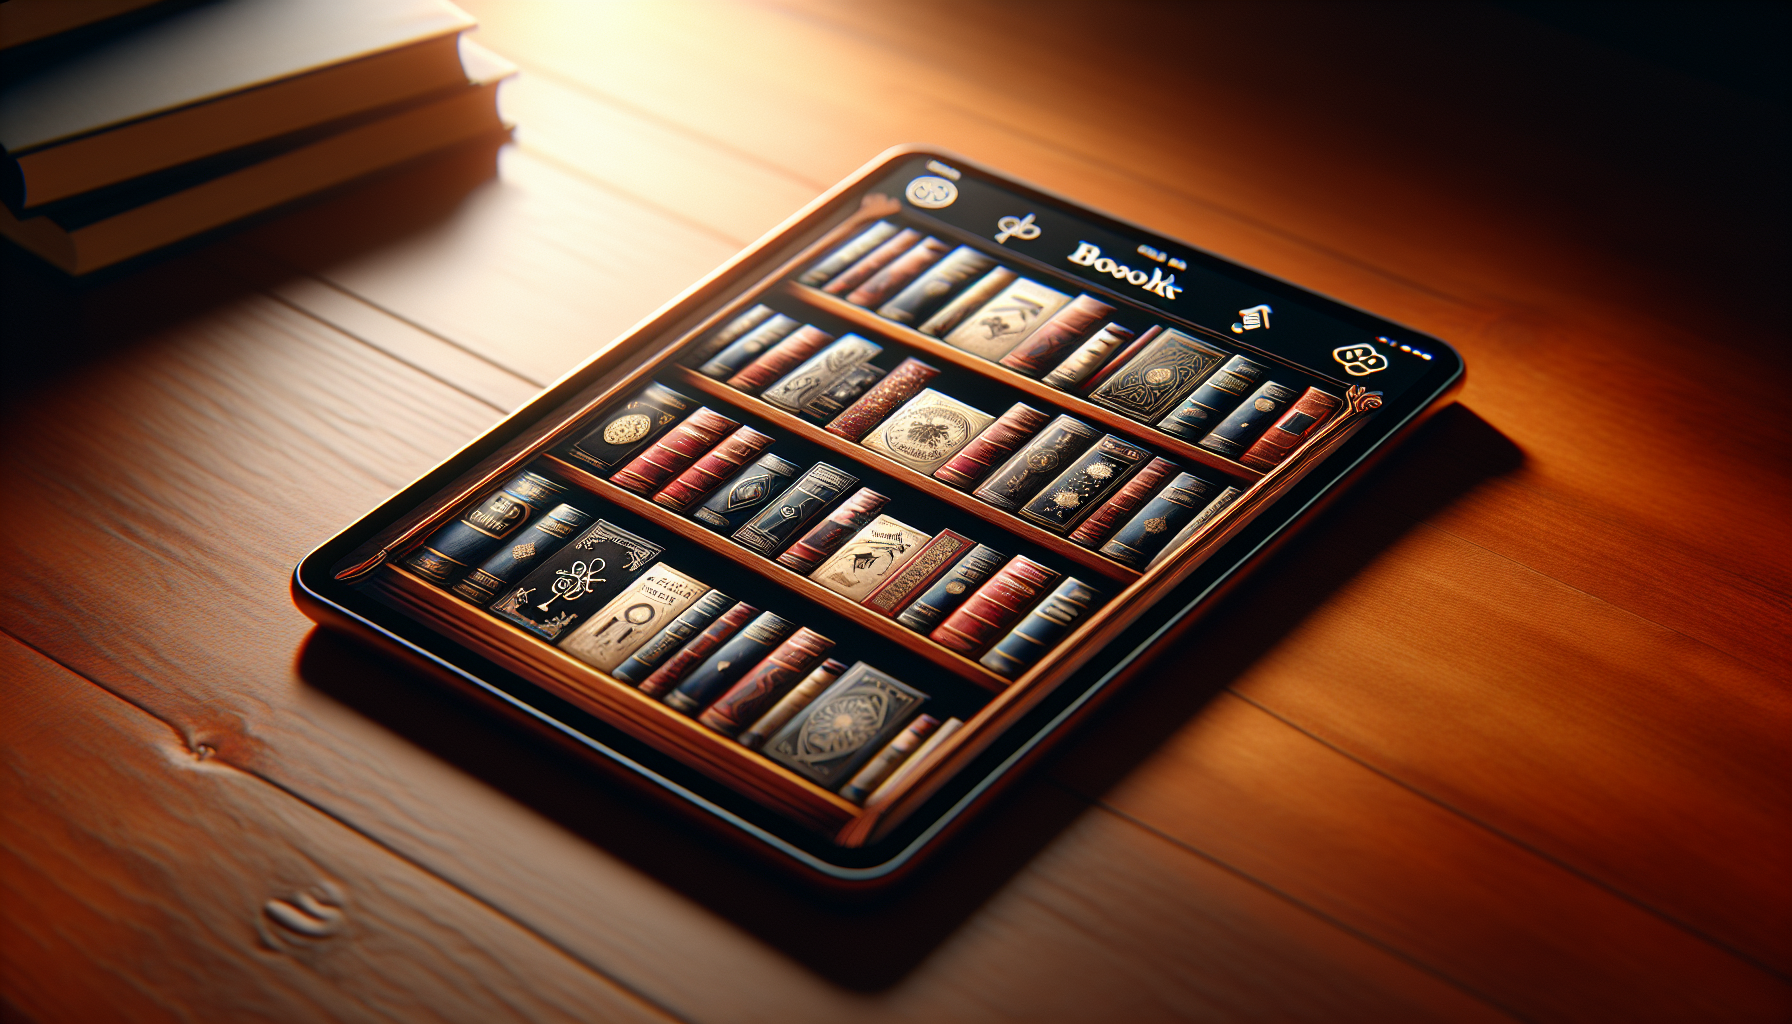 A digital tablet with classic book collection app